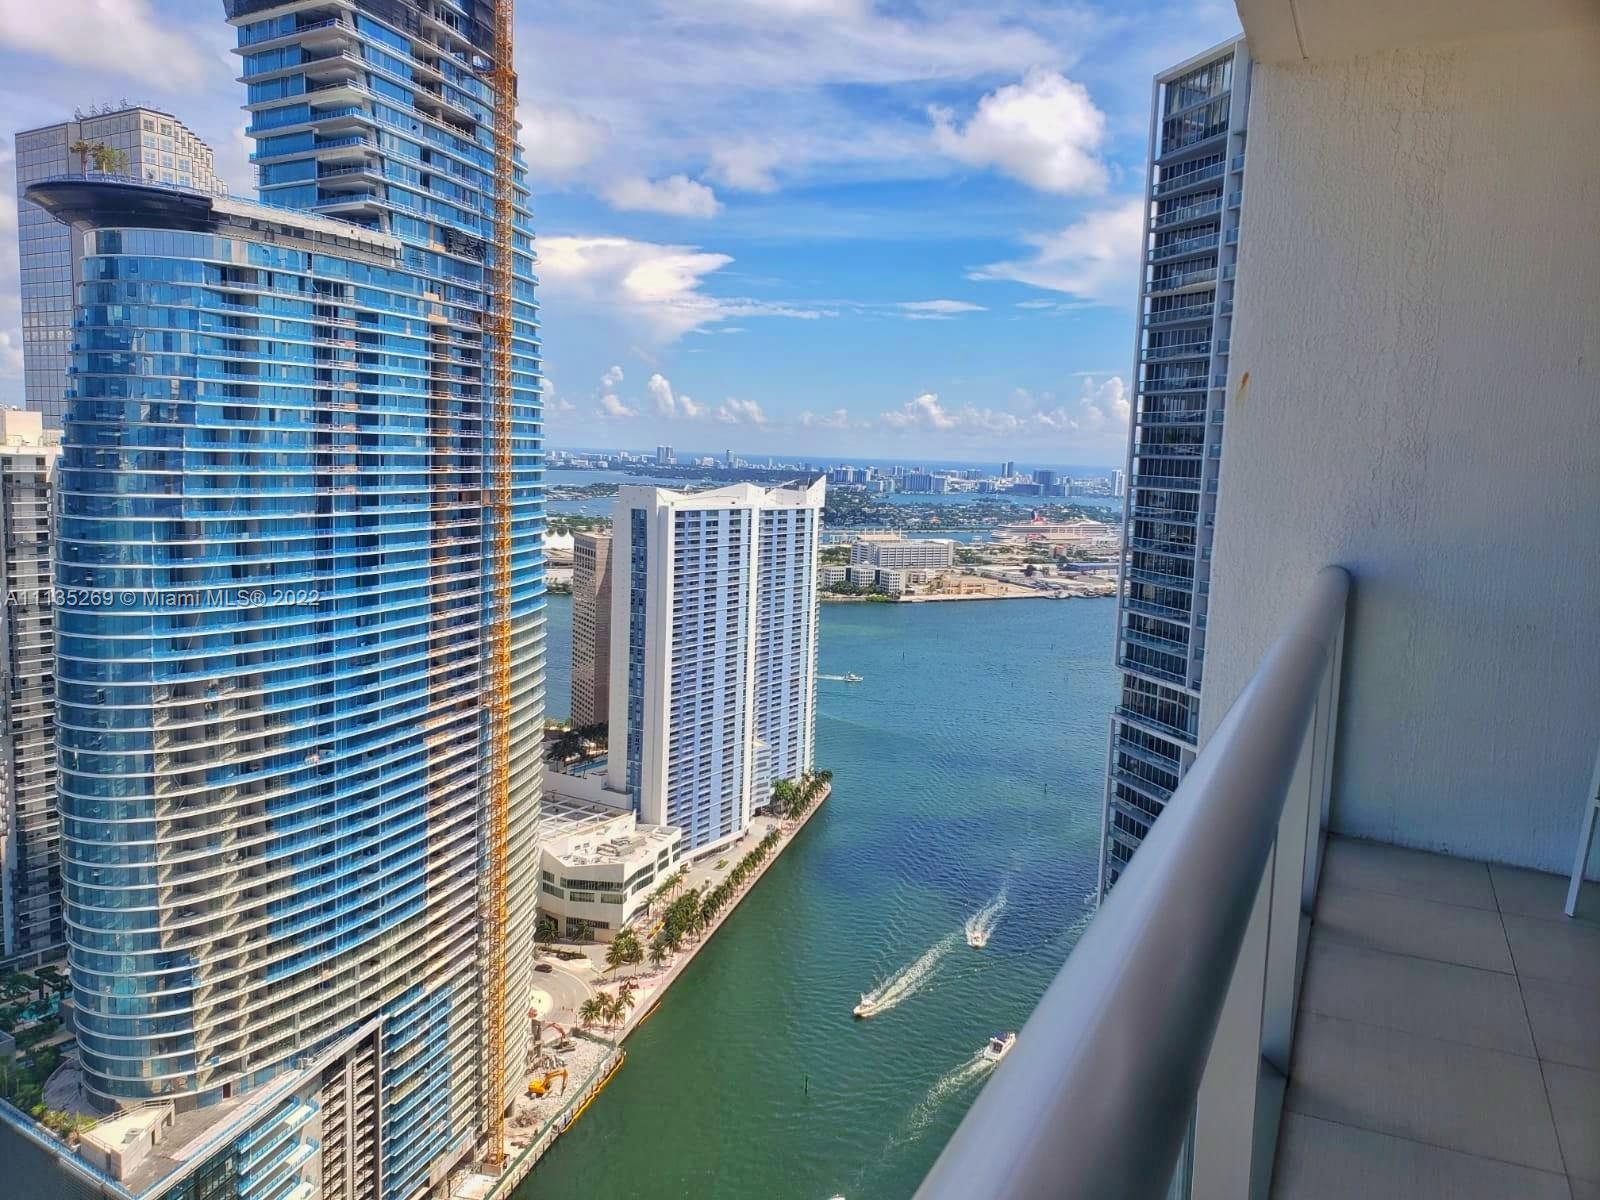 Amazing  Penthouse, located on 49th floor with amazing water and city views. Short term rentals allo